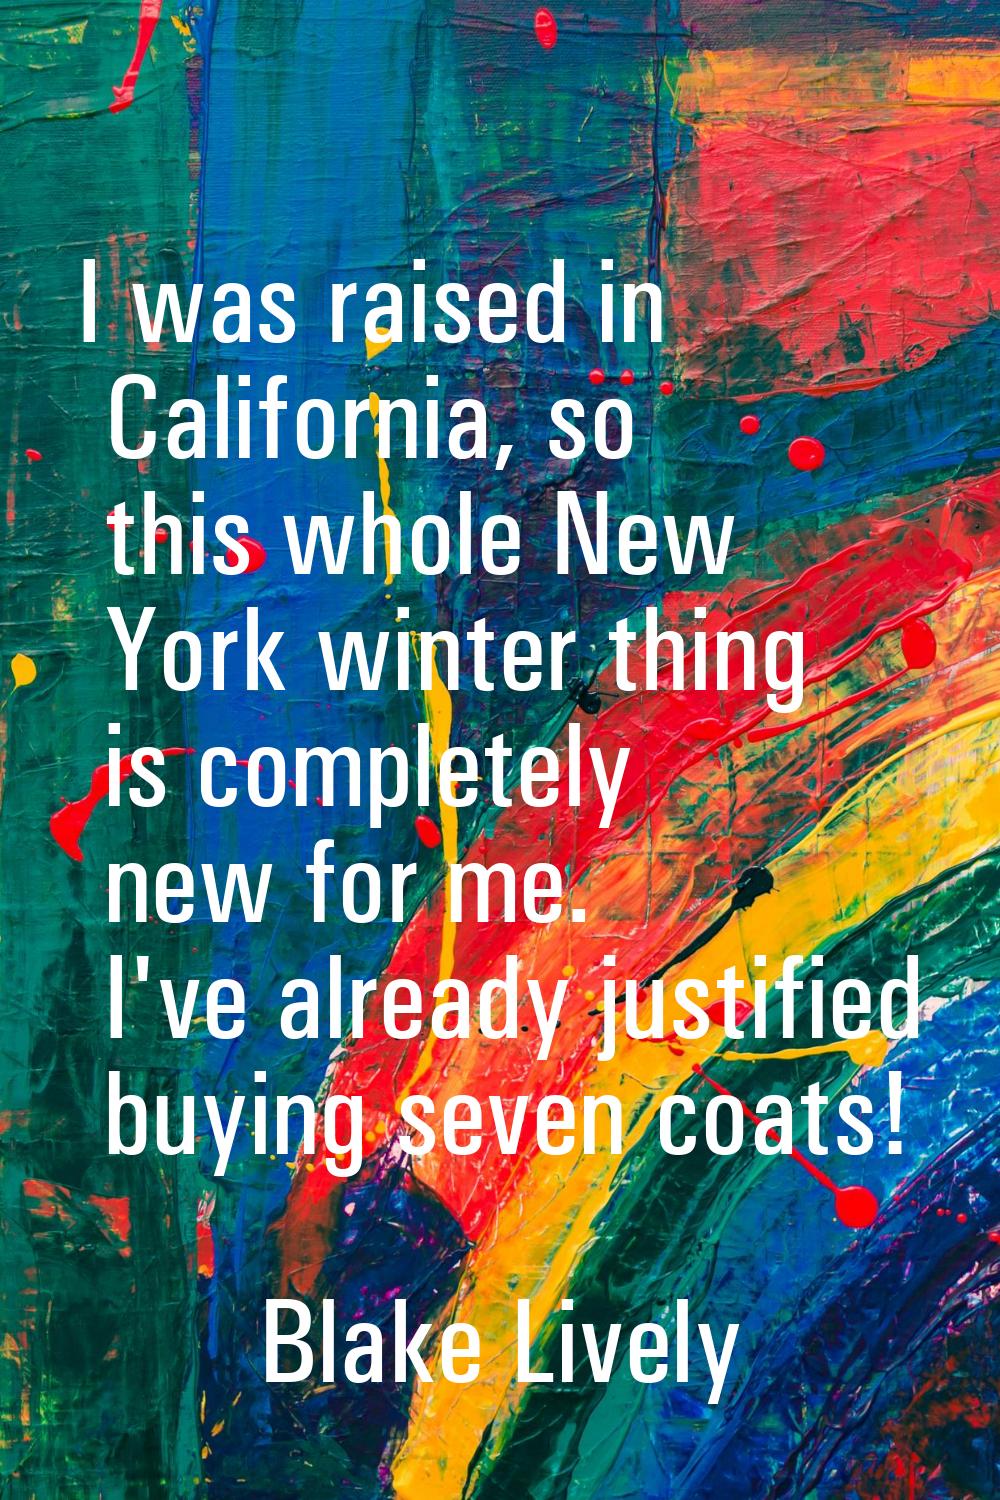 I was raised in California, so this whole New York winter thing is completely new for me. I've alre